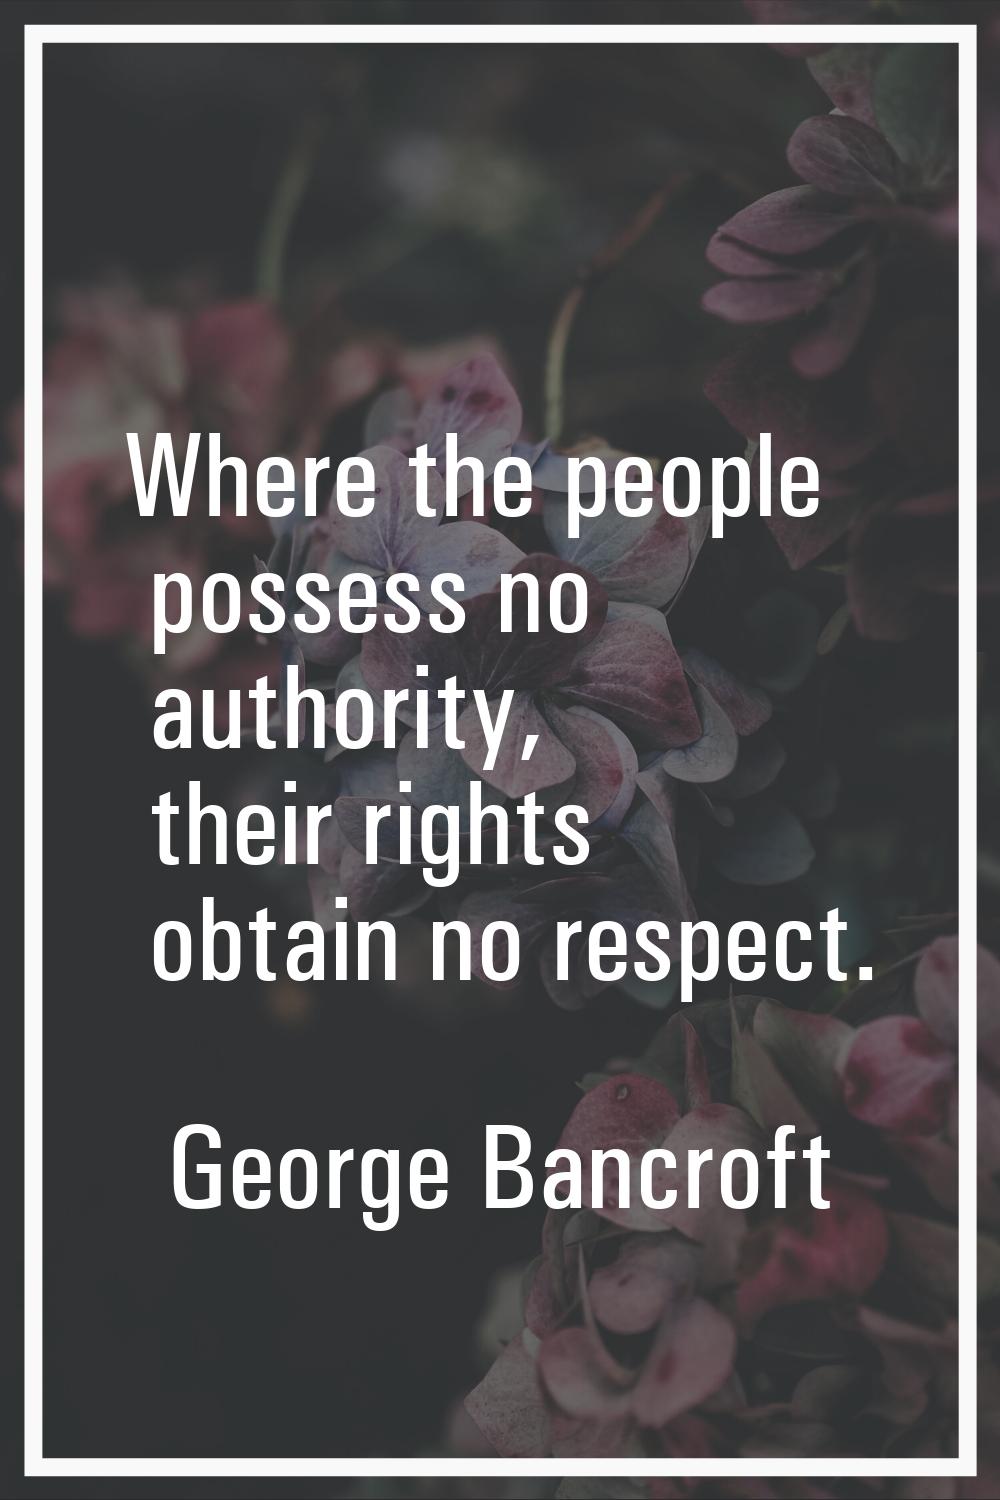 Where the people possess no authority, their rights obtain no respect.